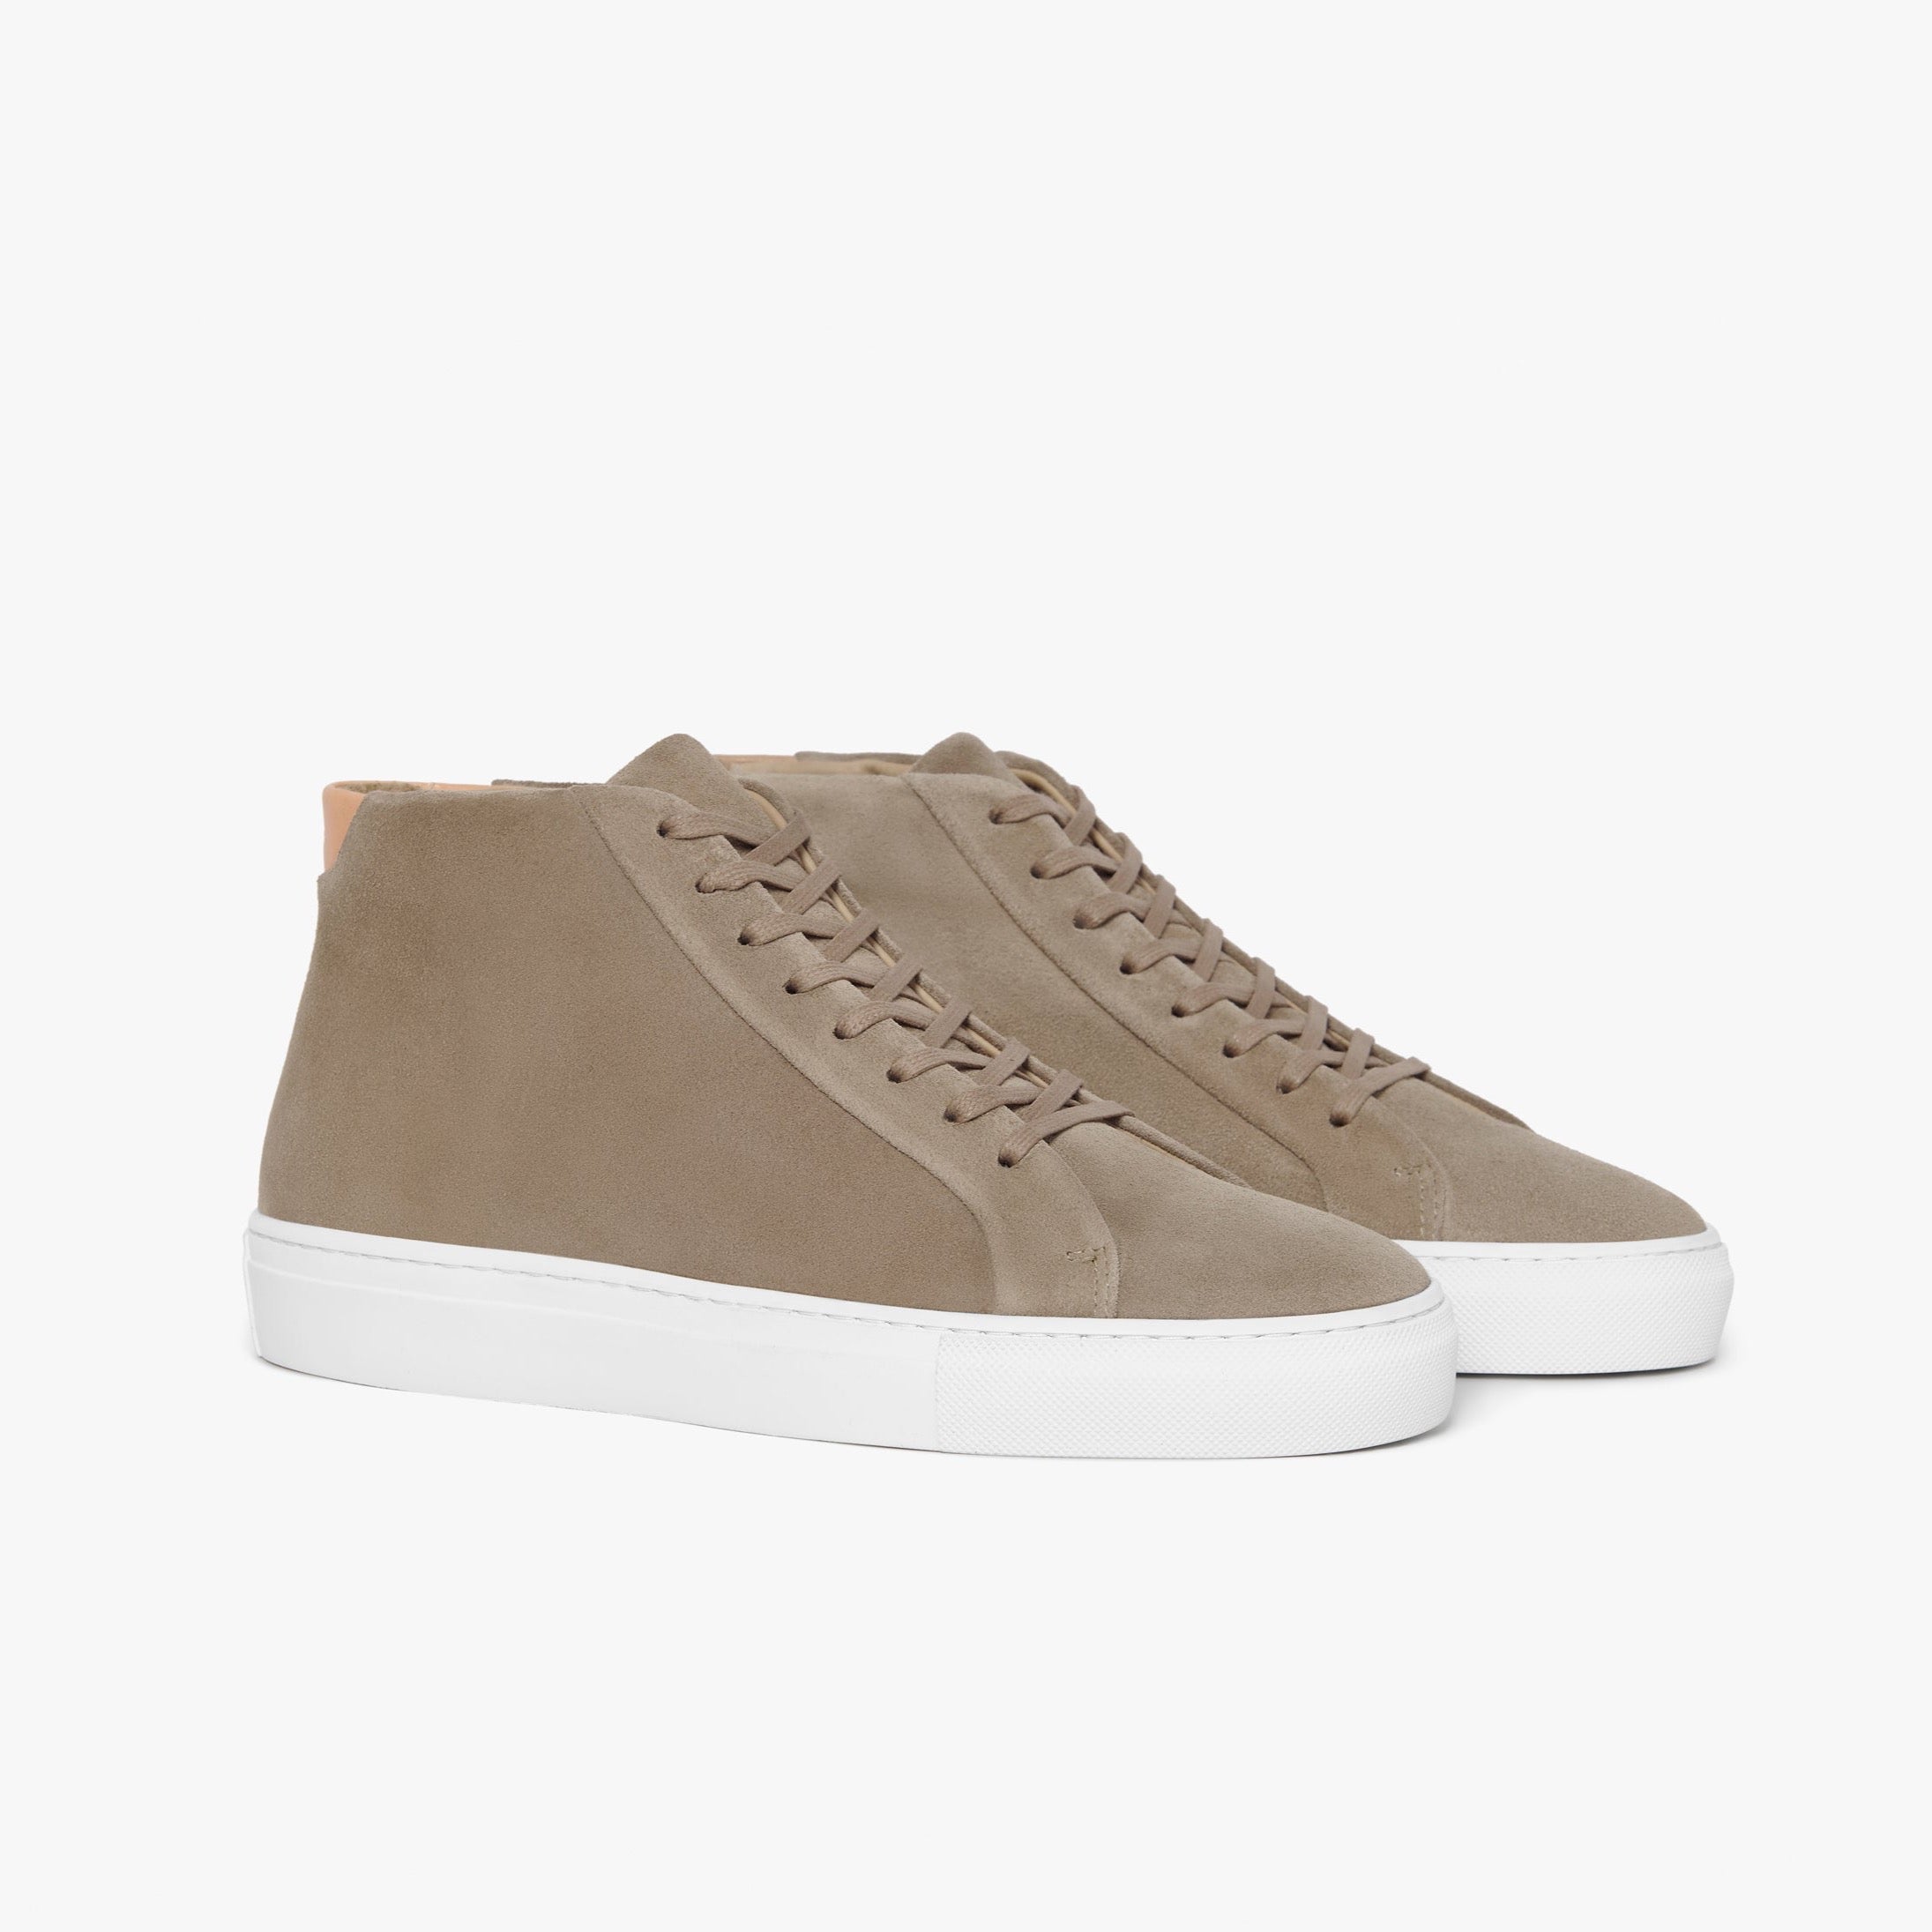 Series 4 Fawn Suede Womens